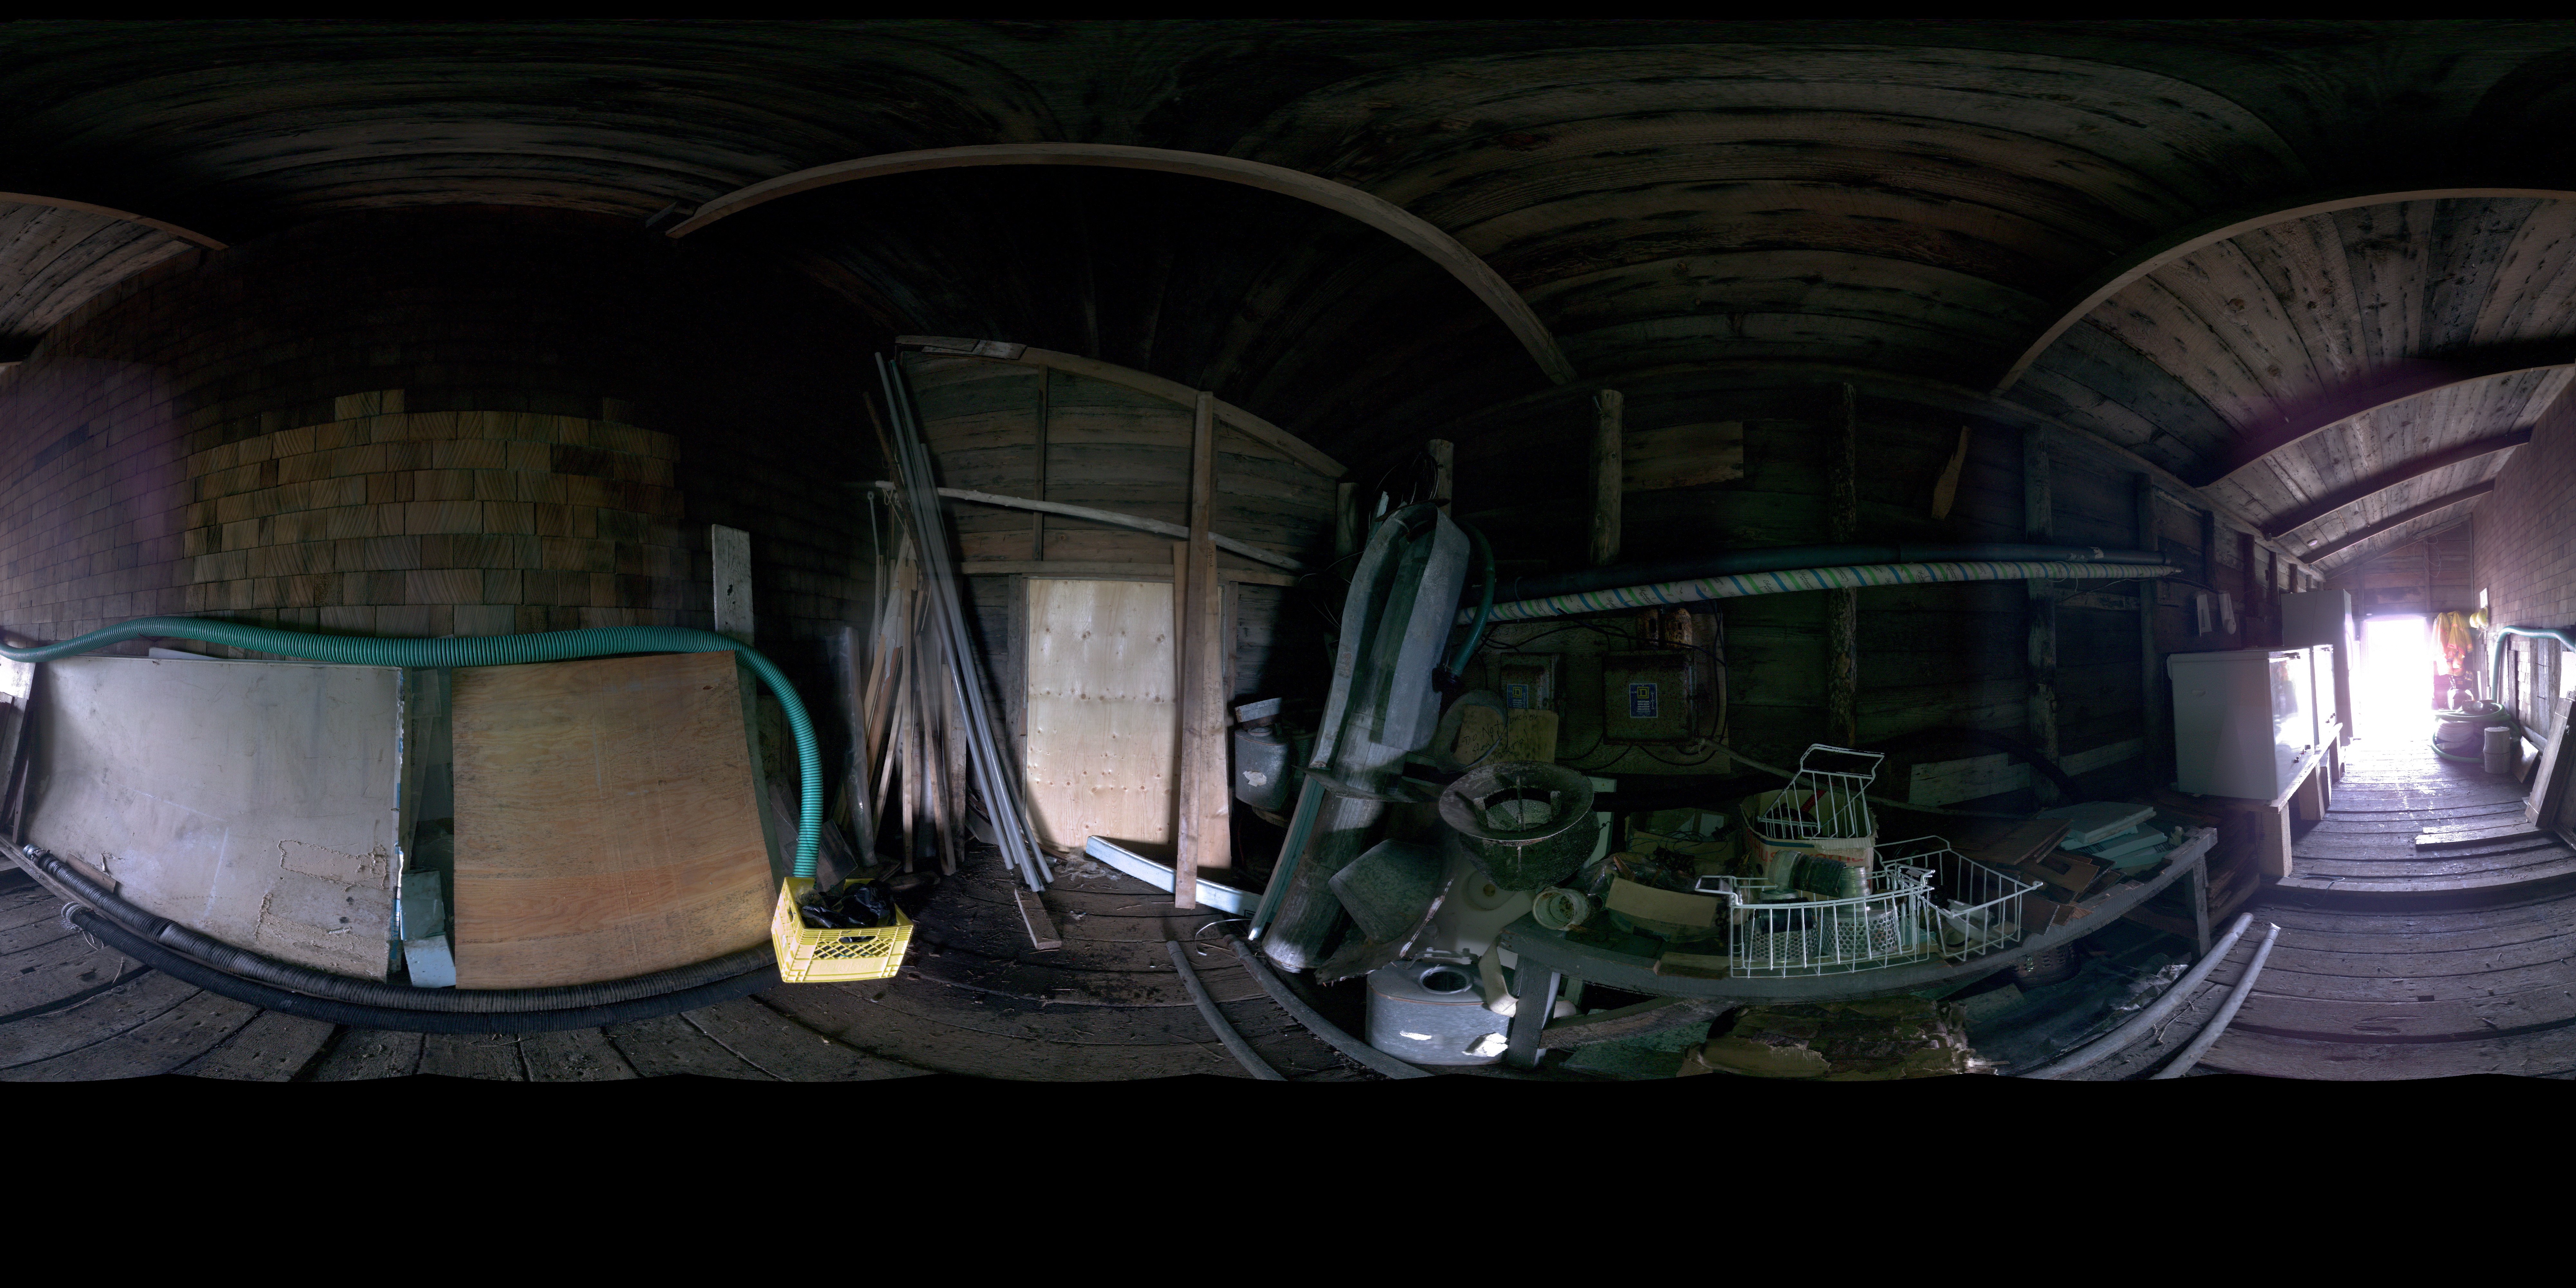 Panoramic view of the Pacific Steam Whaling Co. Bonehouse interior from the Leica BKL 360, scanning location 3